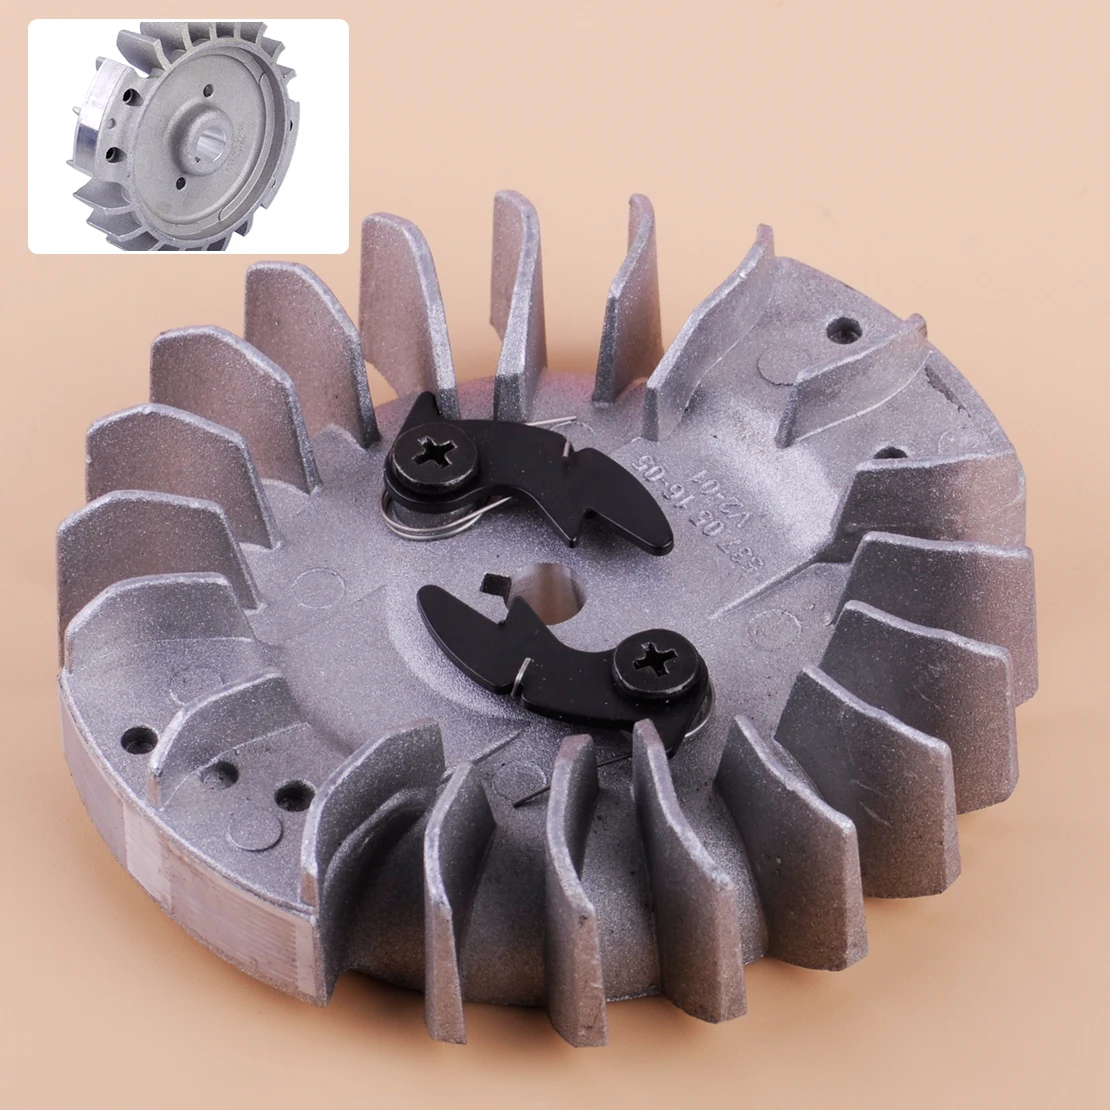 Metal Chainsaw Flywheel Fit for Husqvarna 61 268 272 XP K Cut Off Saws Assembly